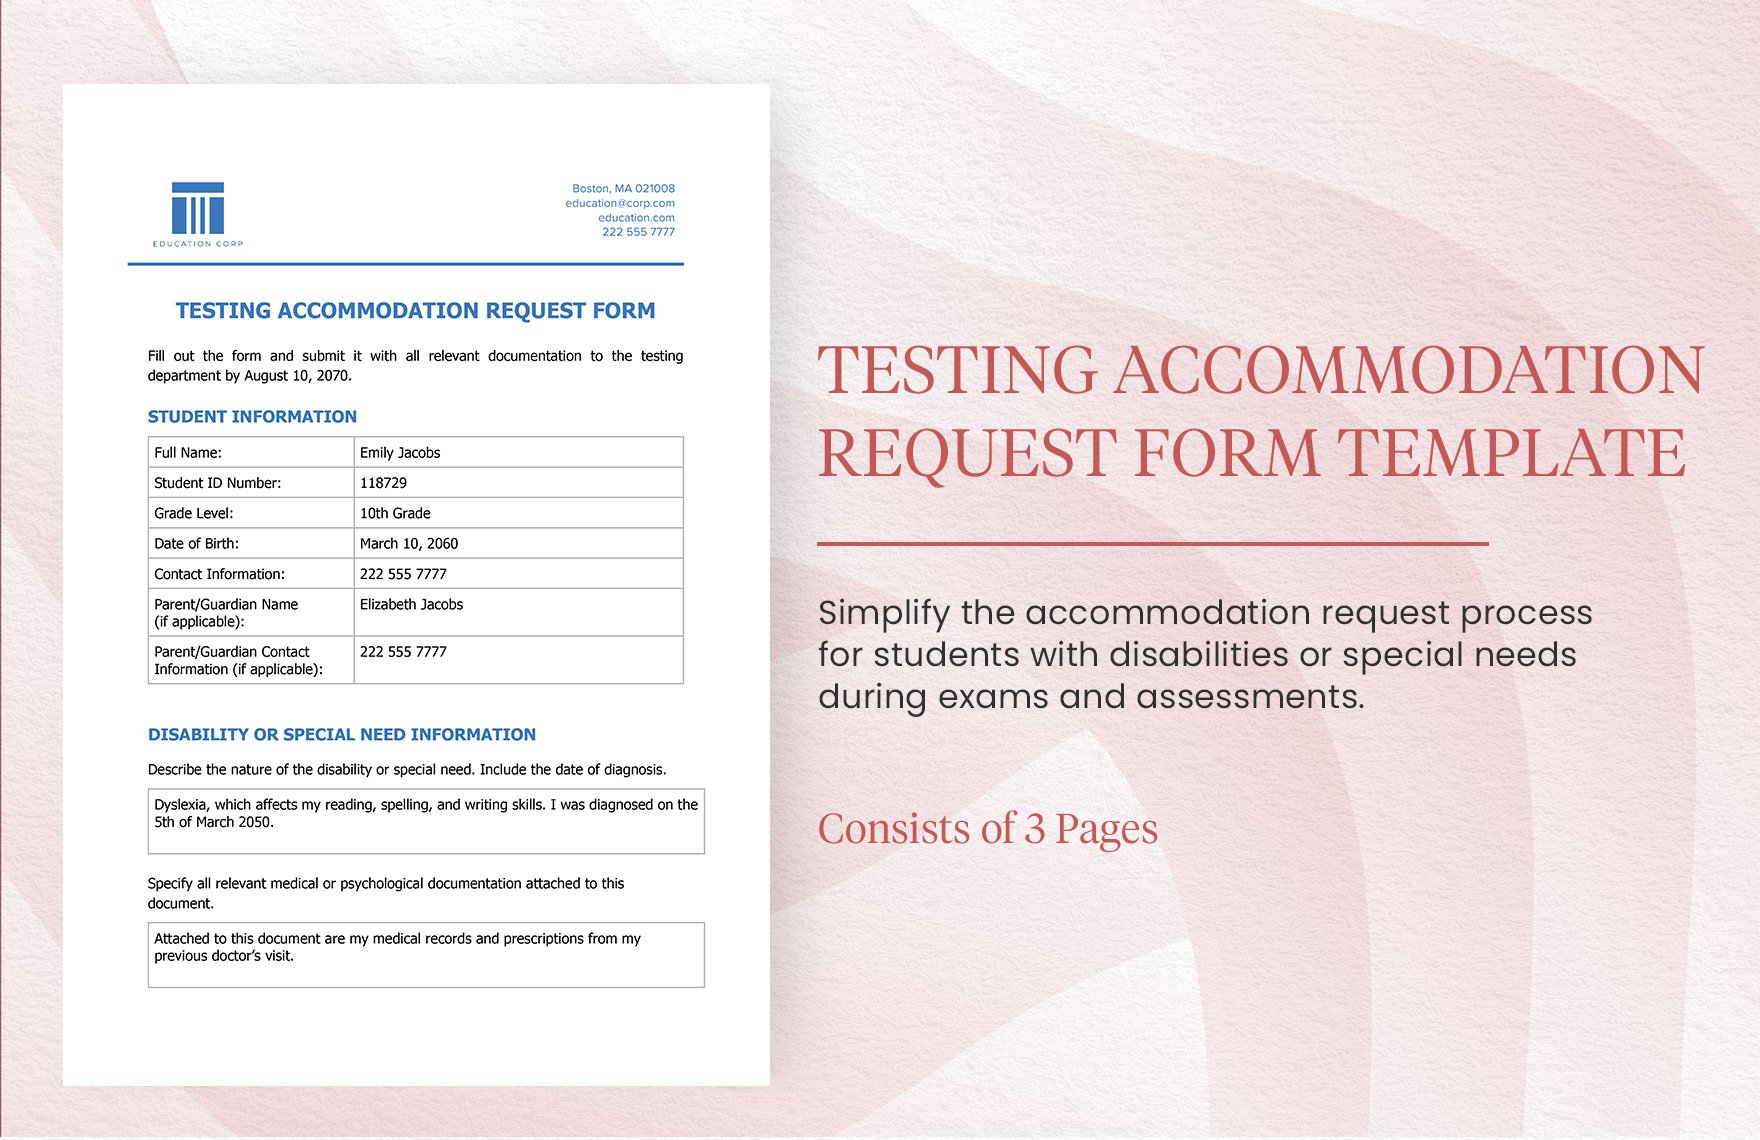 Testing Accommodation Request Form Template